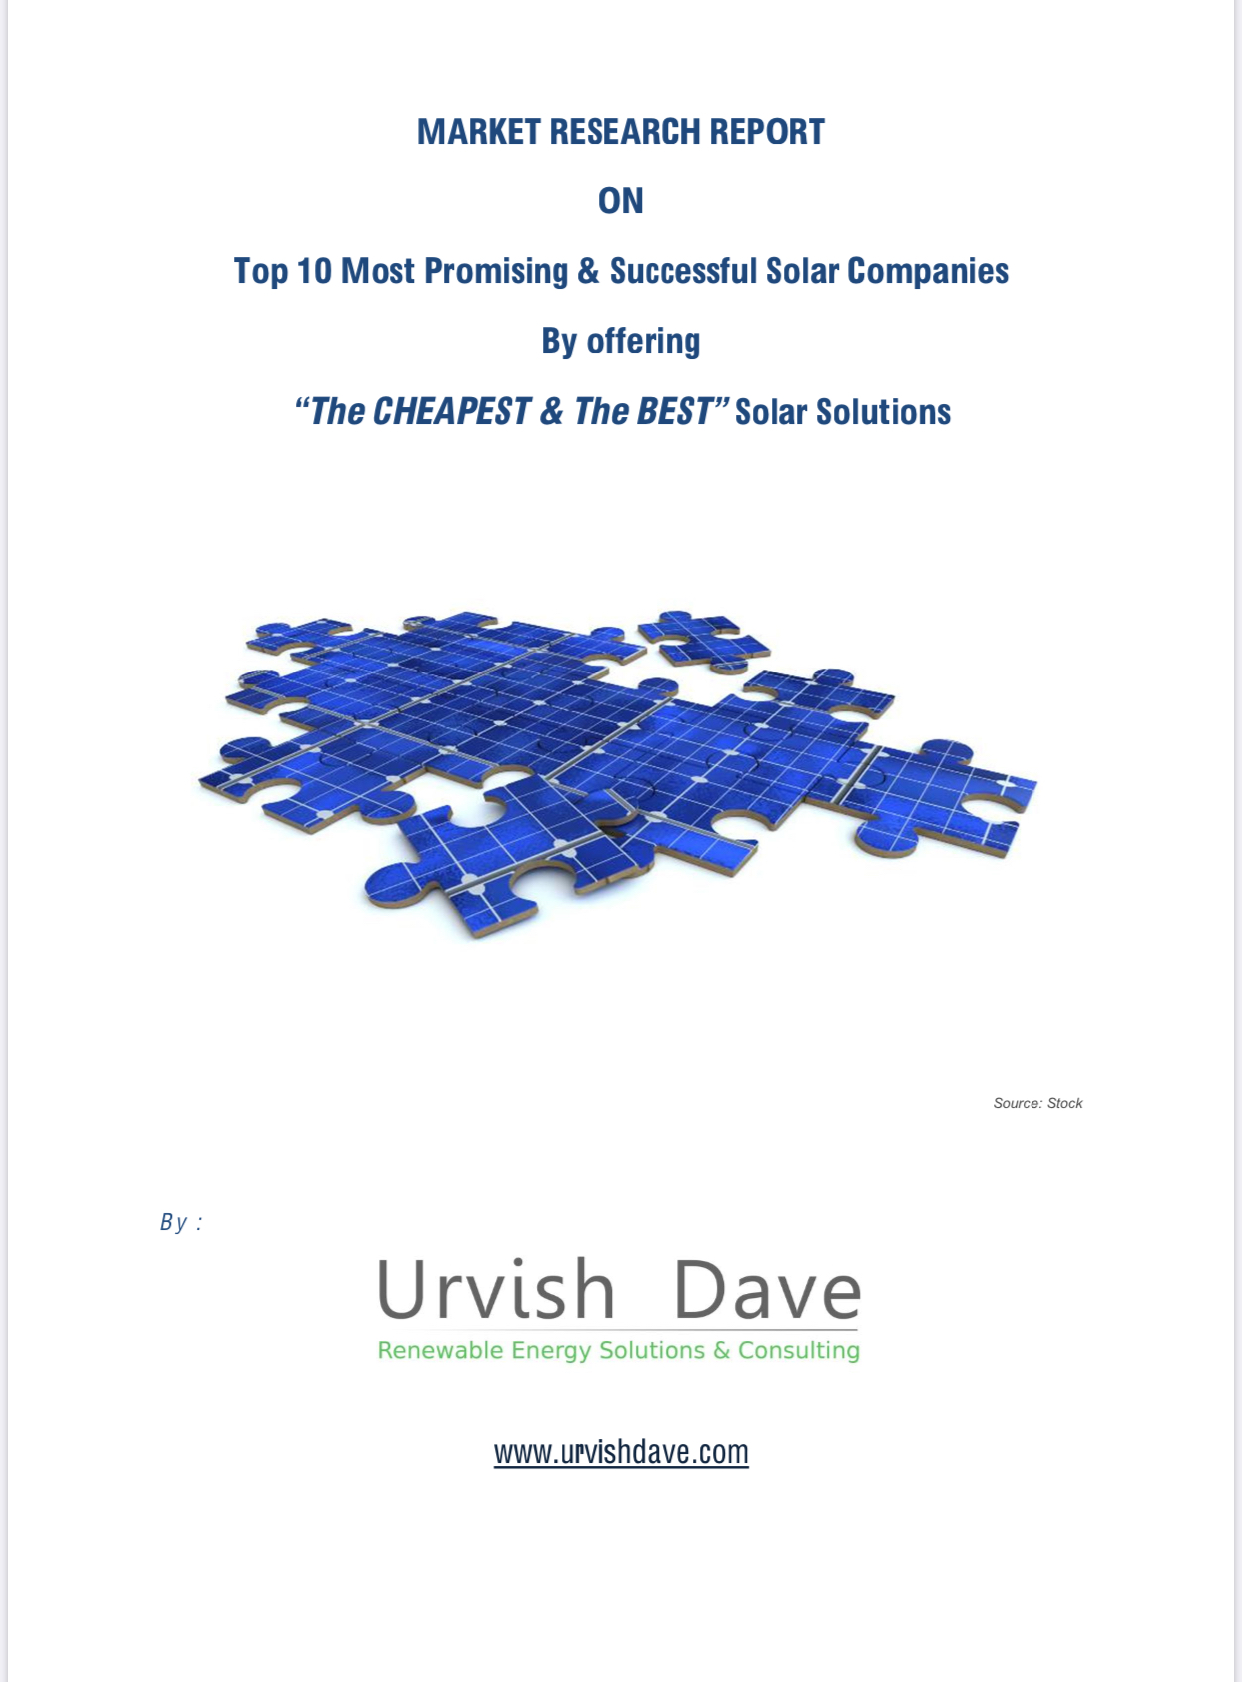 Top 10 Most Promising & Successful Solar Companies By offering “The
CHEAPEST & The BEST” Solar Solutions !